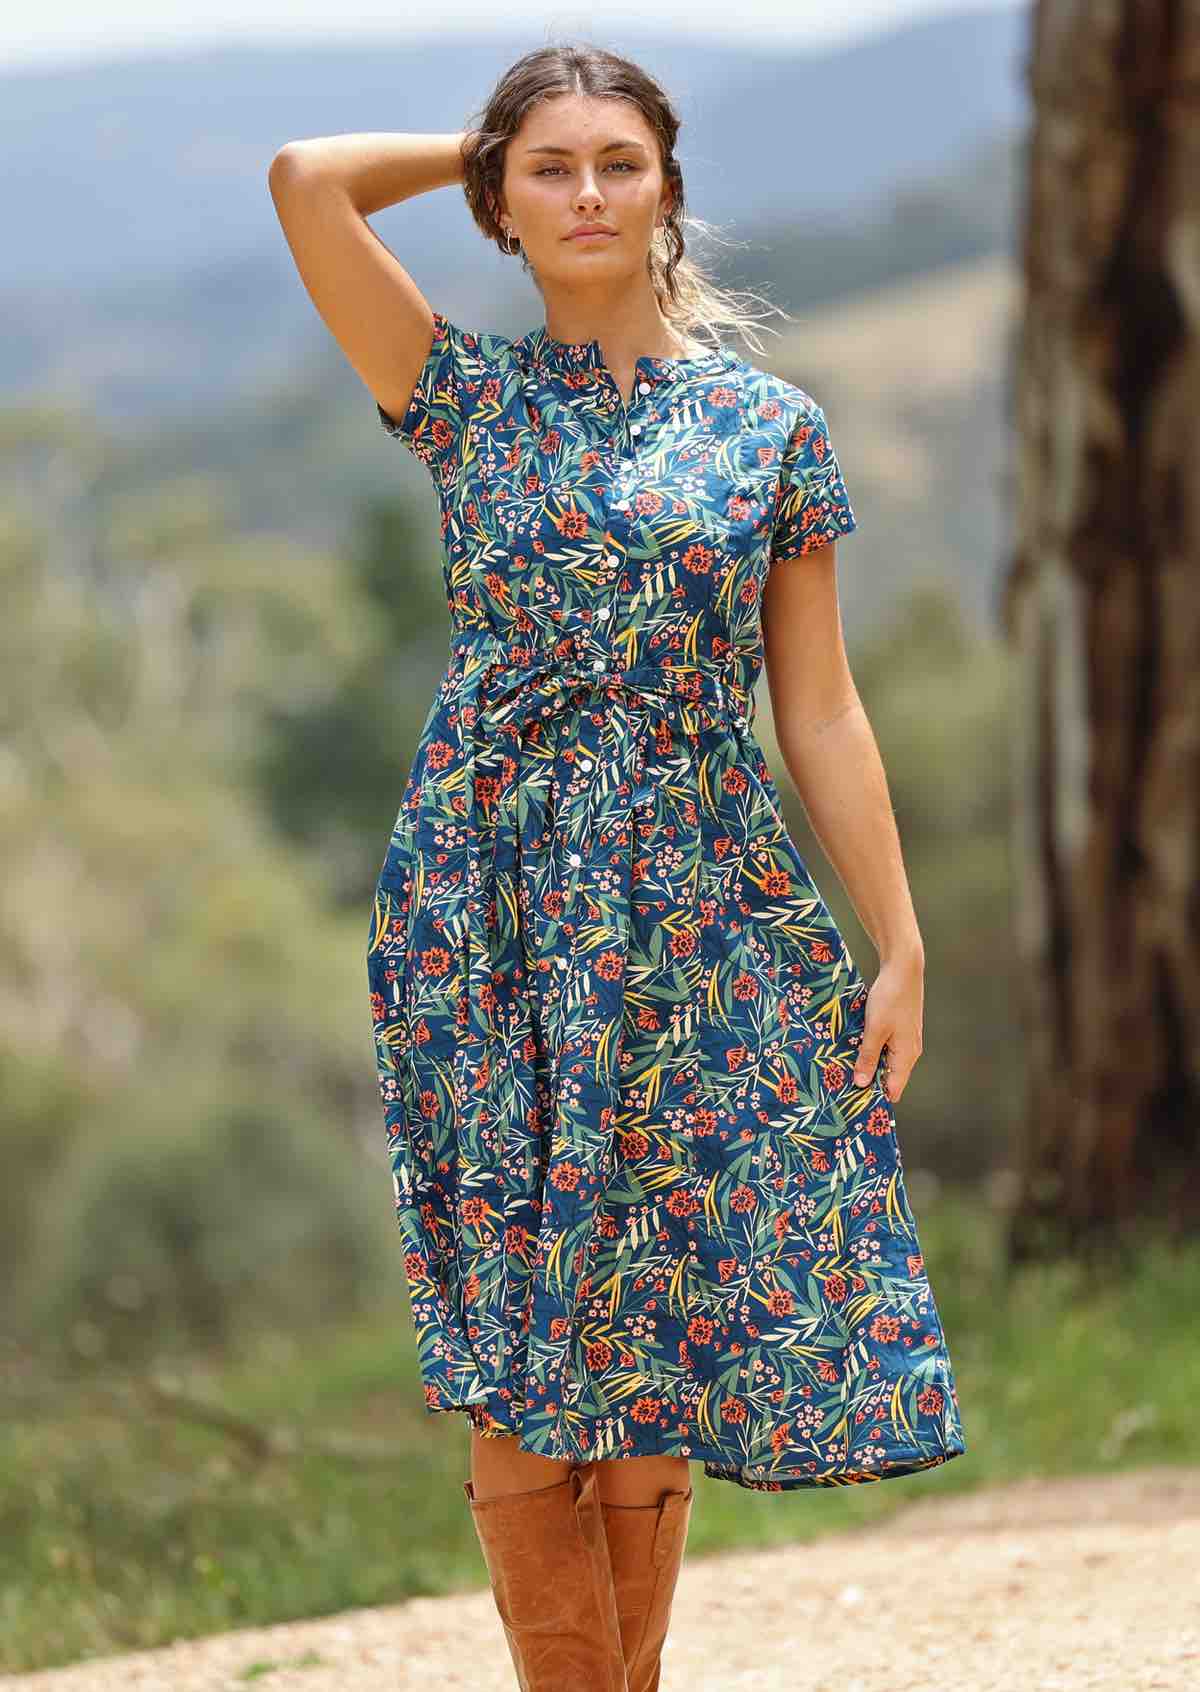 woman wearing floral button up retro style maxi dress trees background